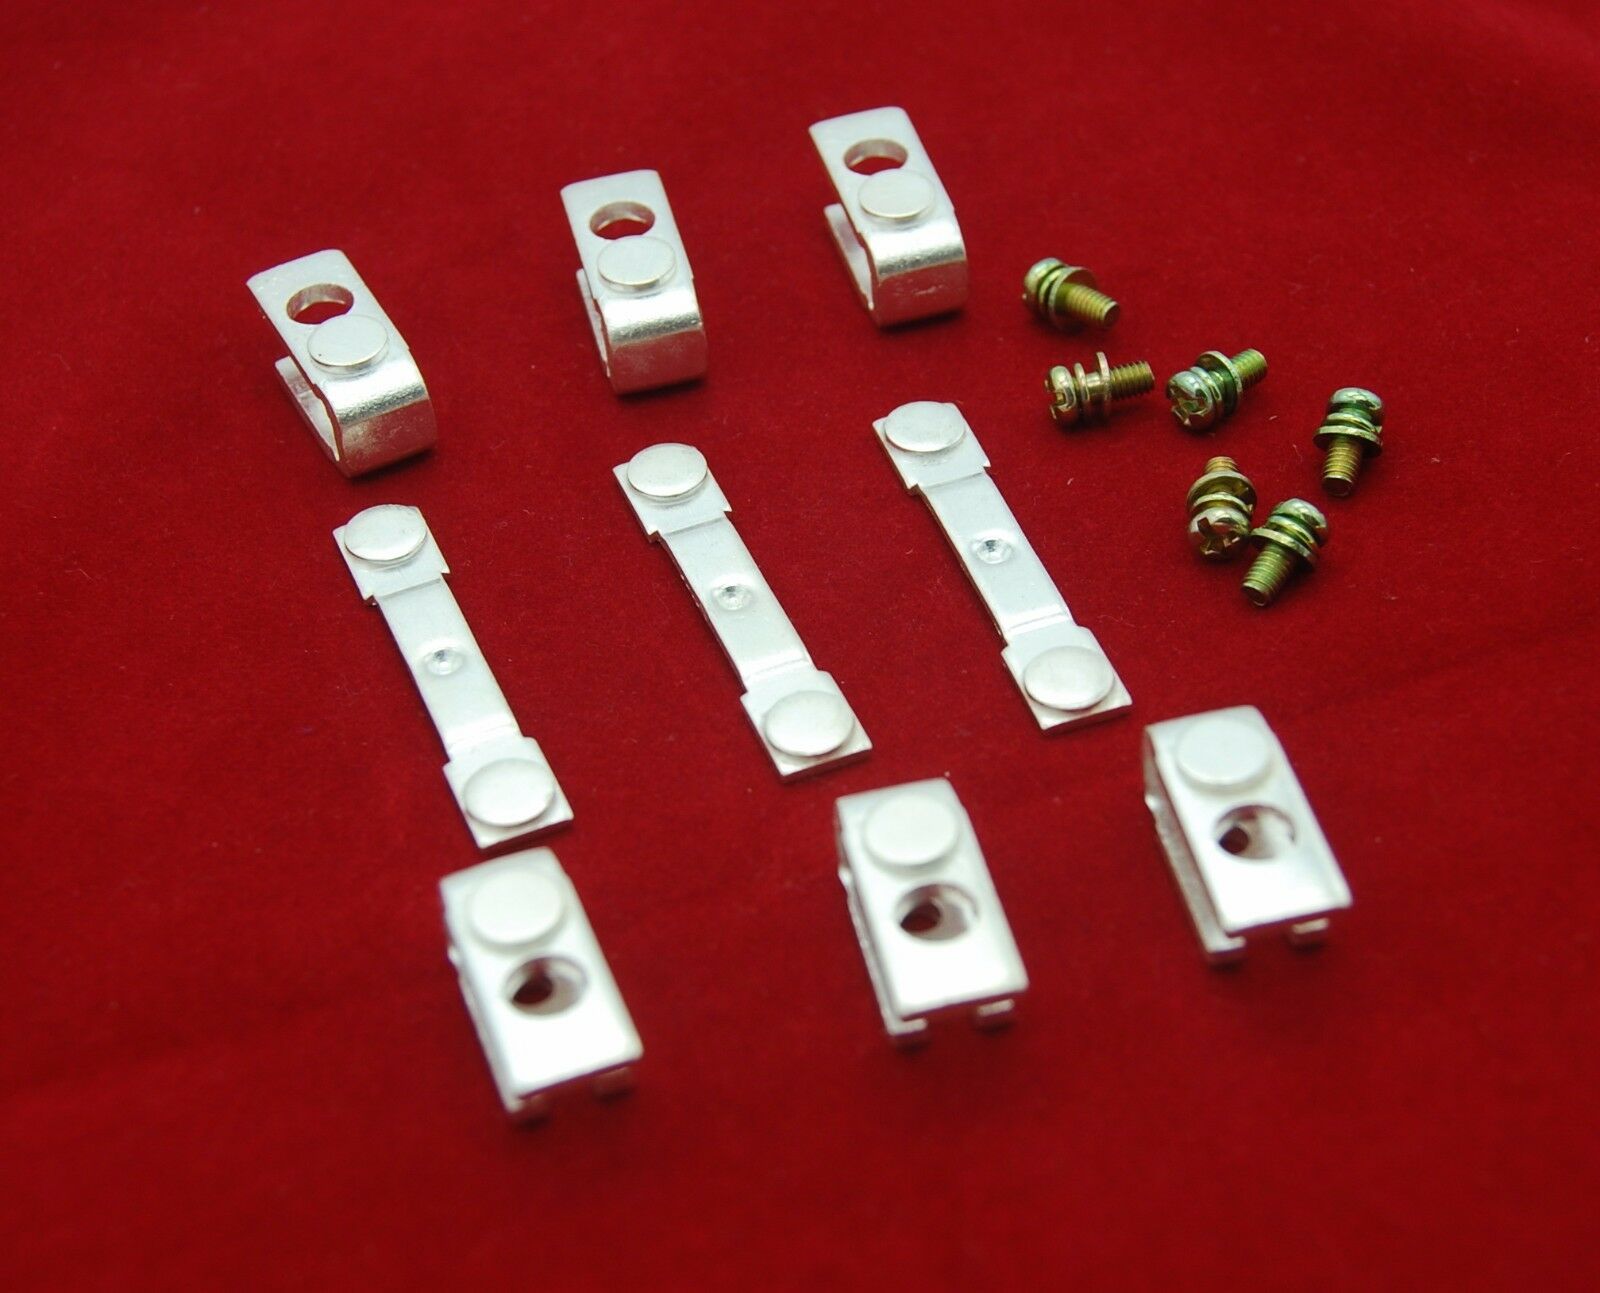 1 Set Fits 3TY7460-OA 3 poles Contact kits for 3TF46 contactor High quality